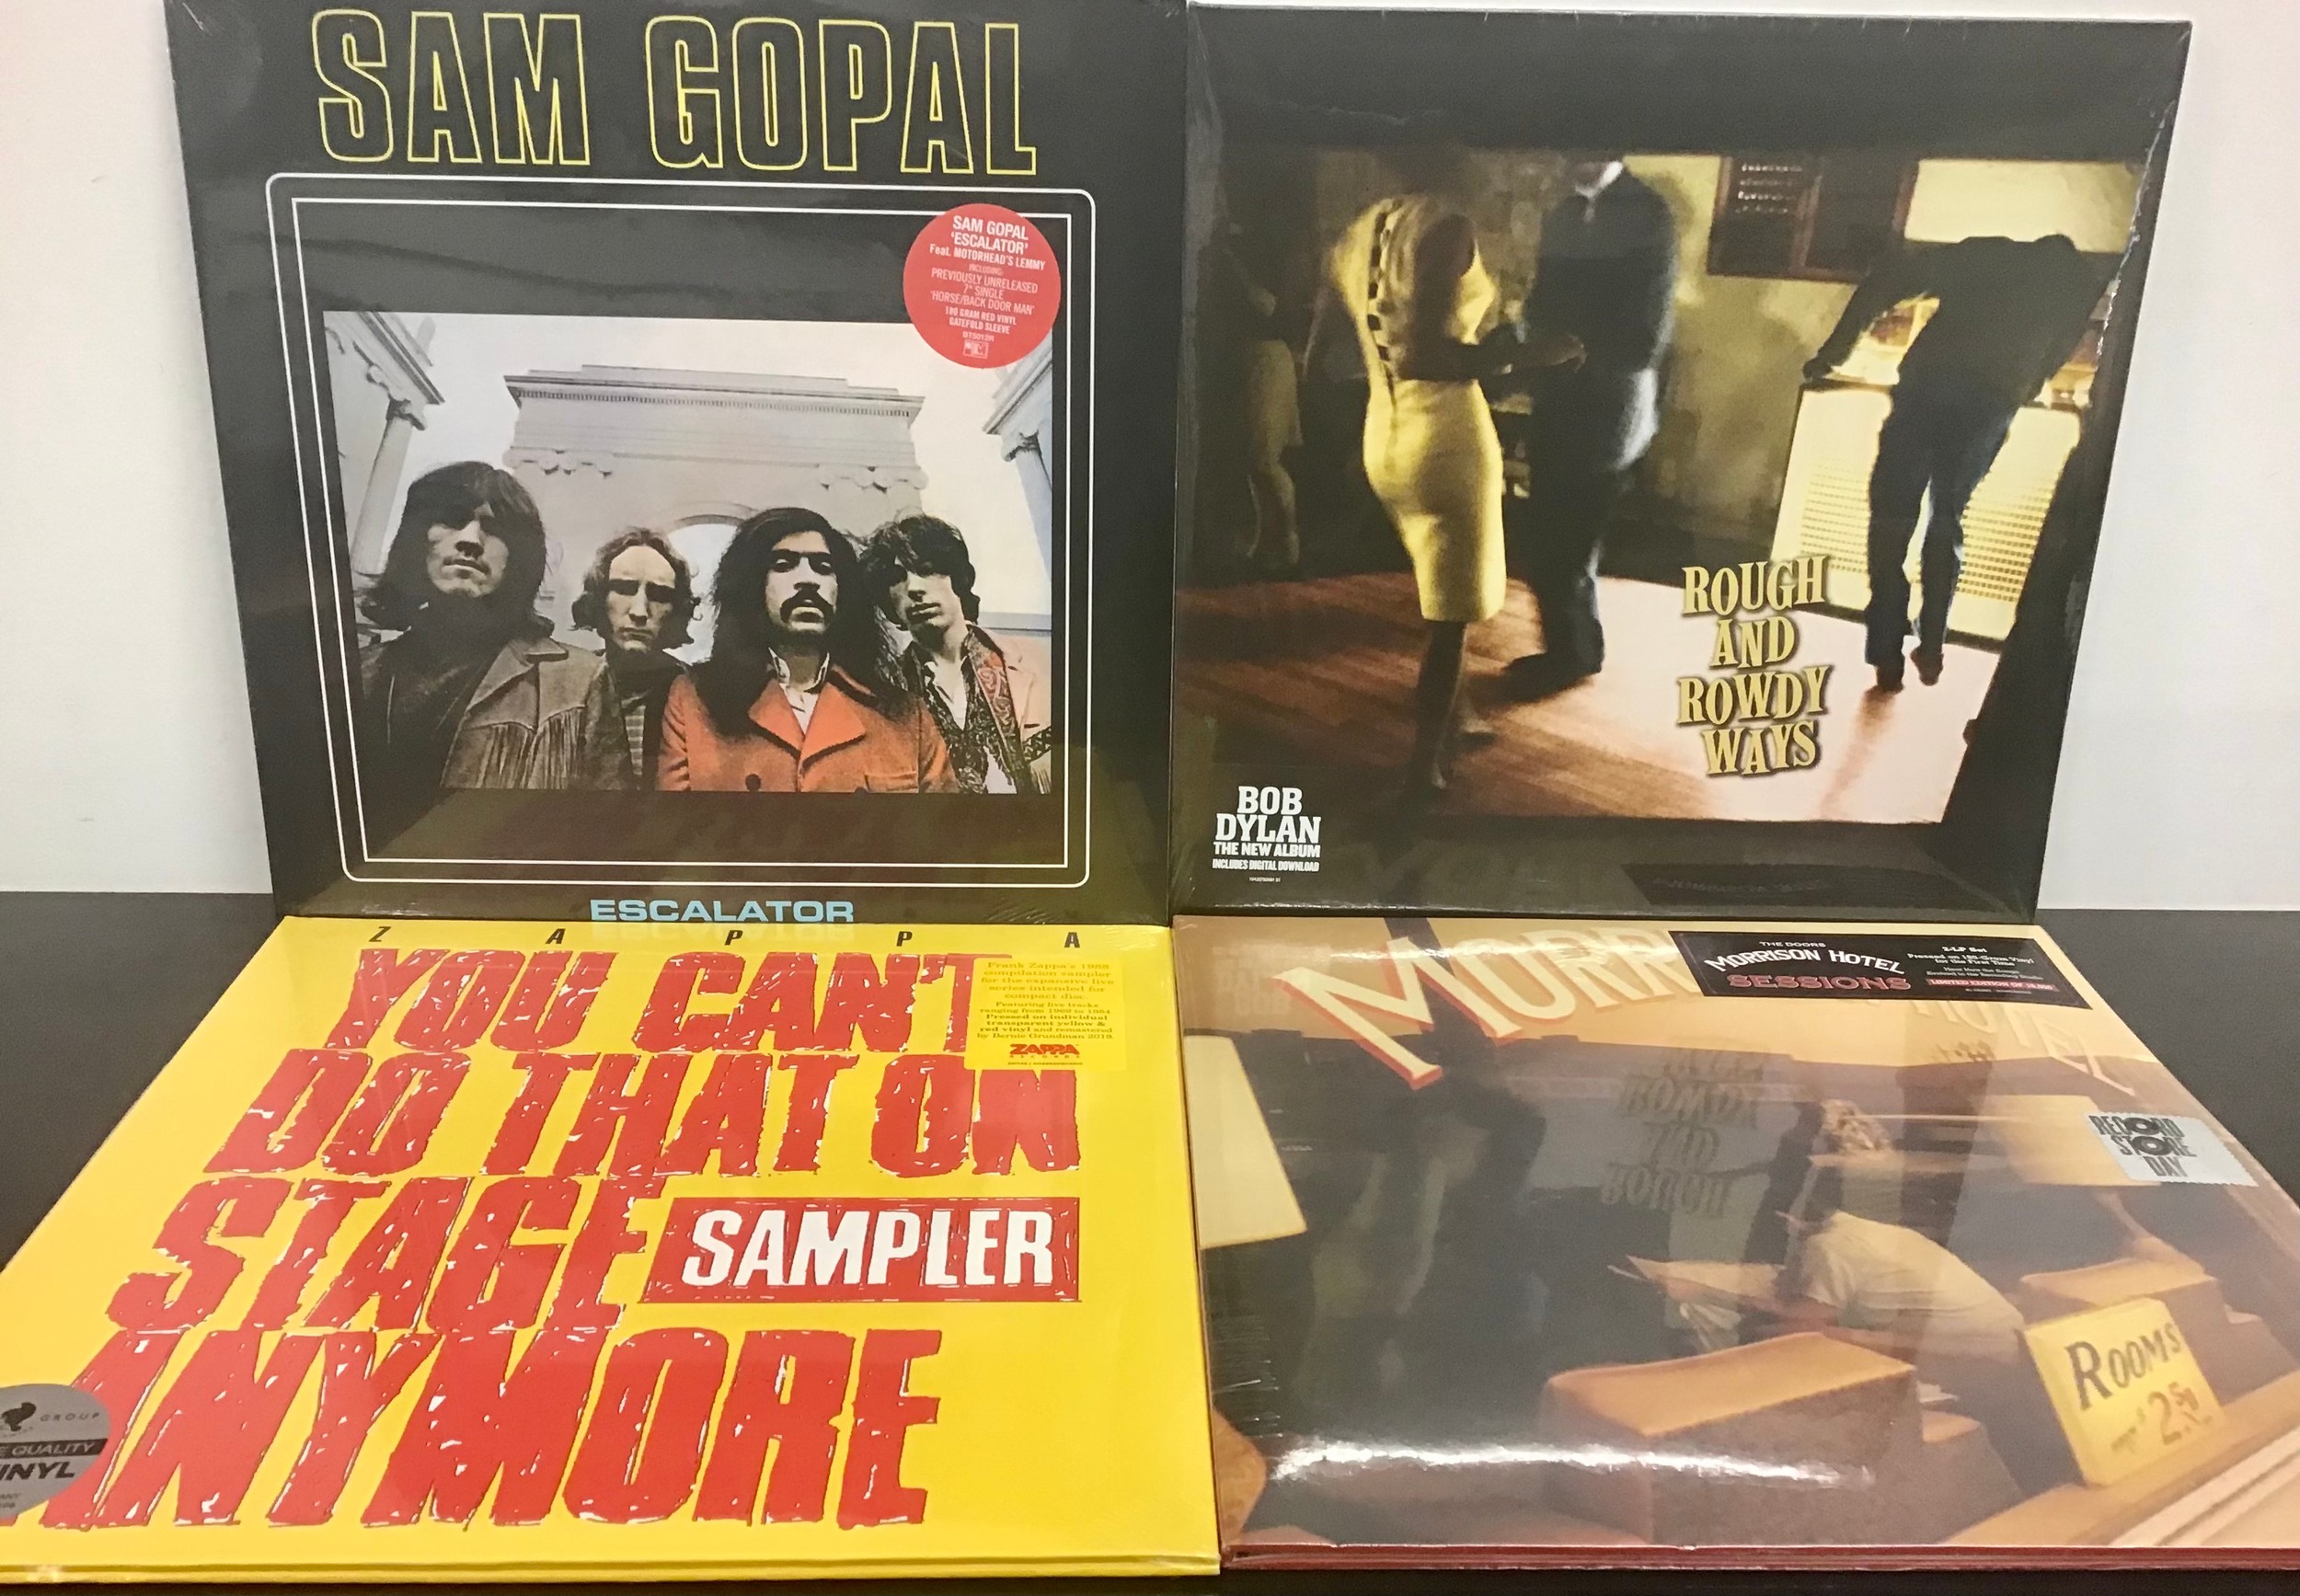 4 X FACTORY SEALED LP RECORDS. Great selection here with titles from - Bob Dylan - Frank Zappa - Sam